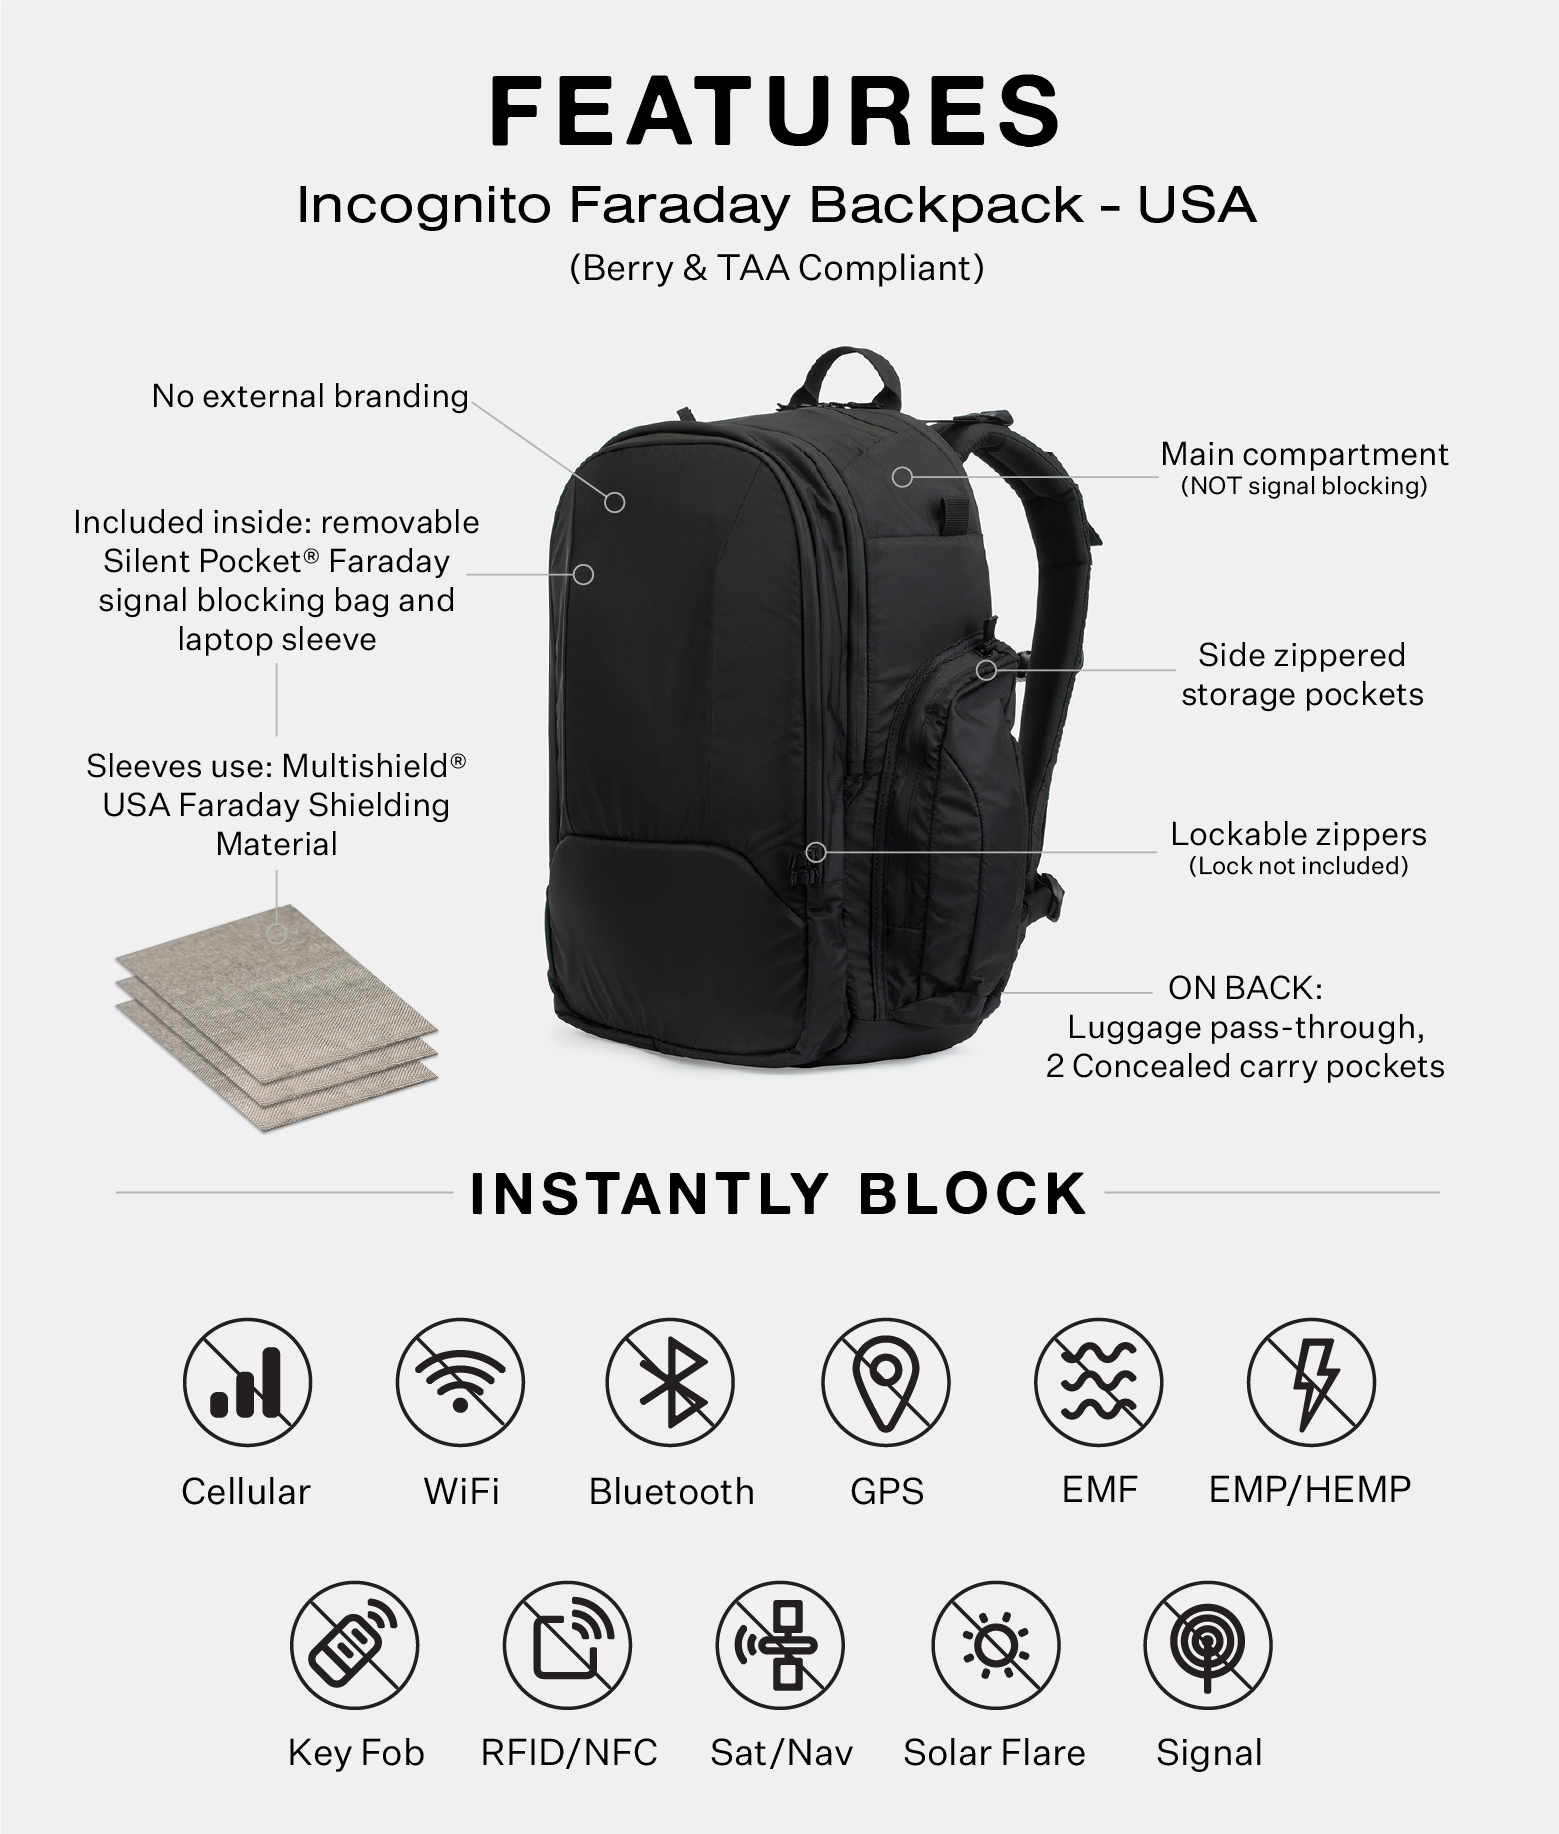 Silent Pocket SLNT Waterproof Faraday Dry Bag Military-Grade Nylon 5 Liter Faraday  Bag - RFID Signal Blocking Dry Bag/Waterproof Backpack Protects Electronics  from Water, Spying, Hacking